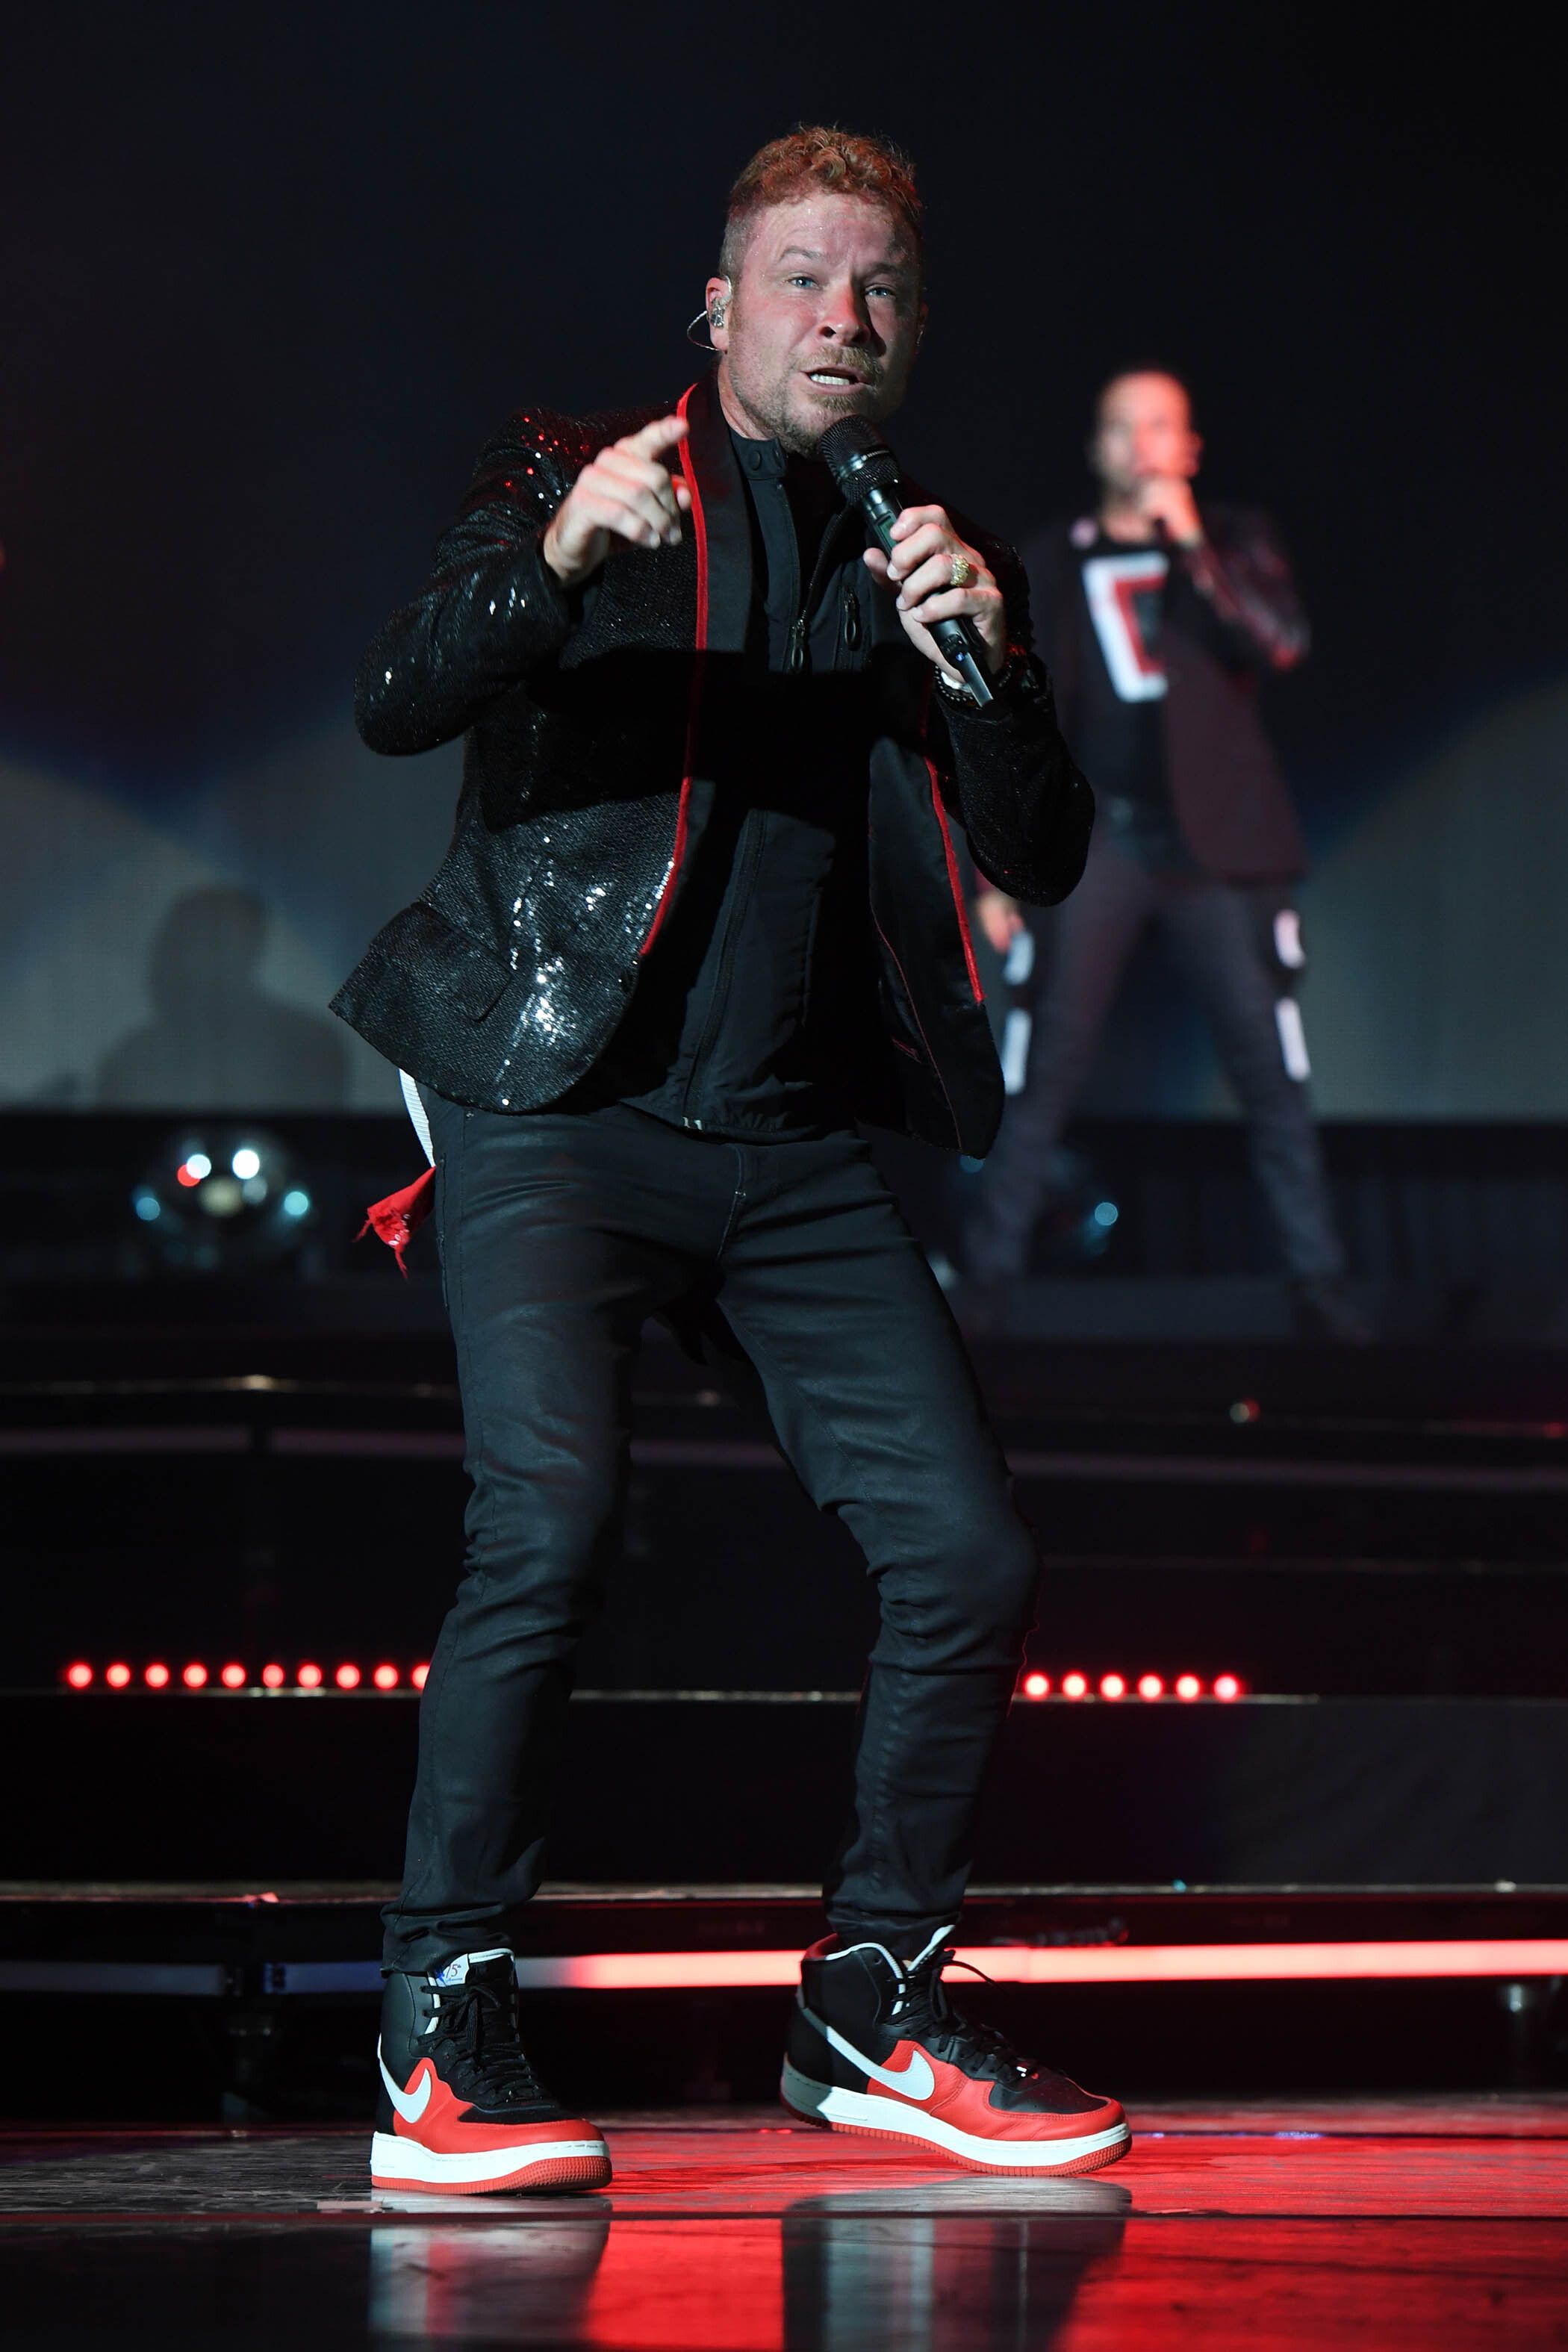 Brian Littrell performing with BSB during DNA tour 2022